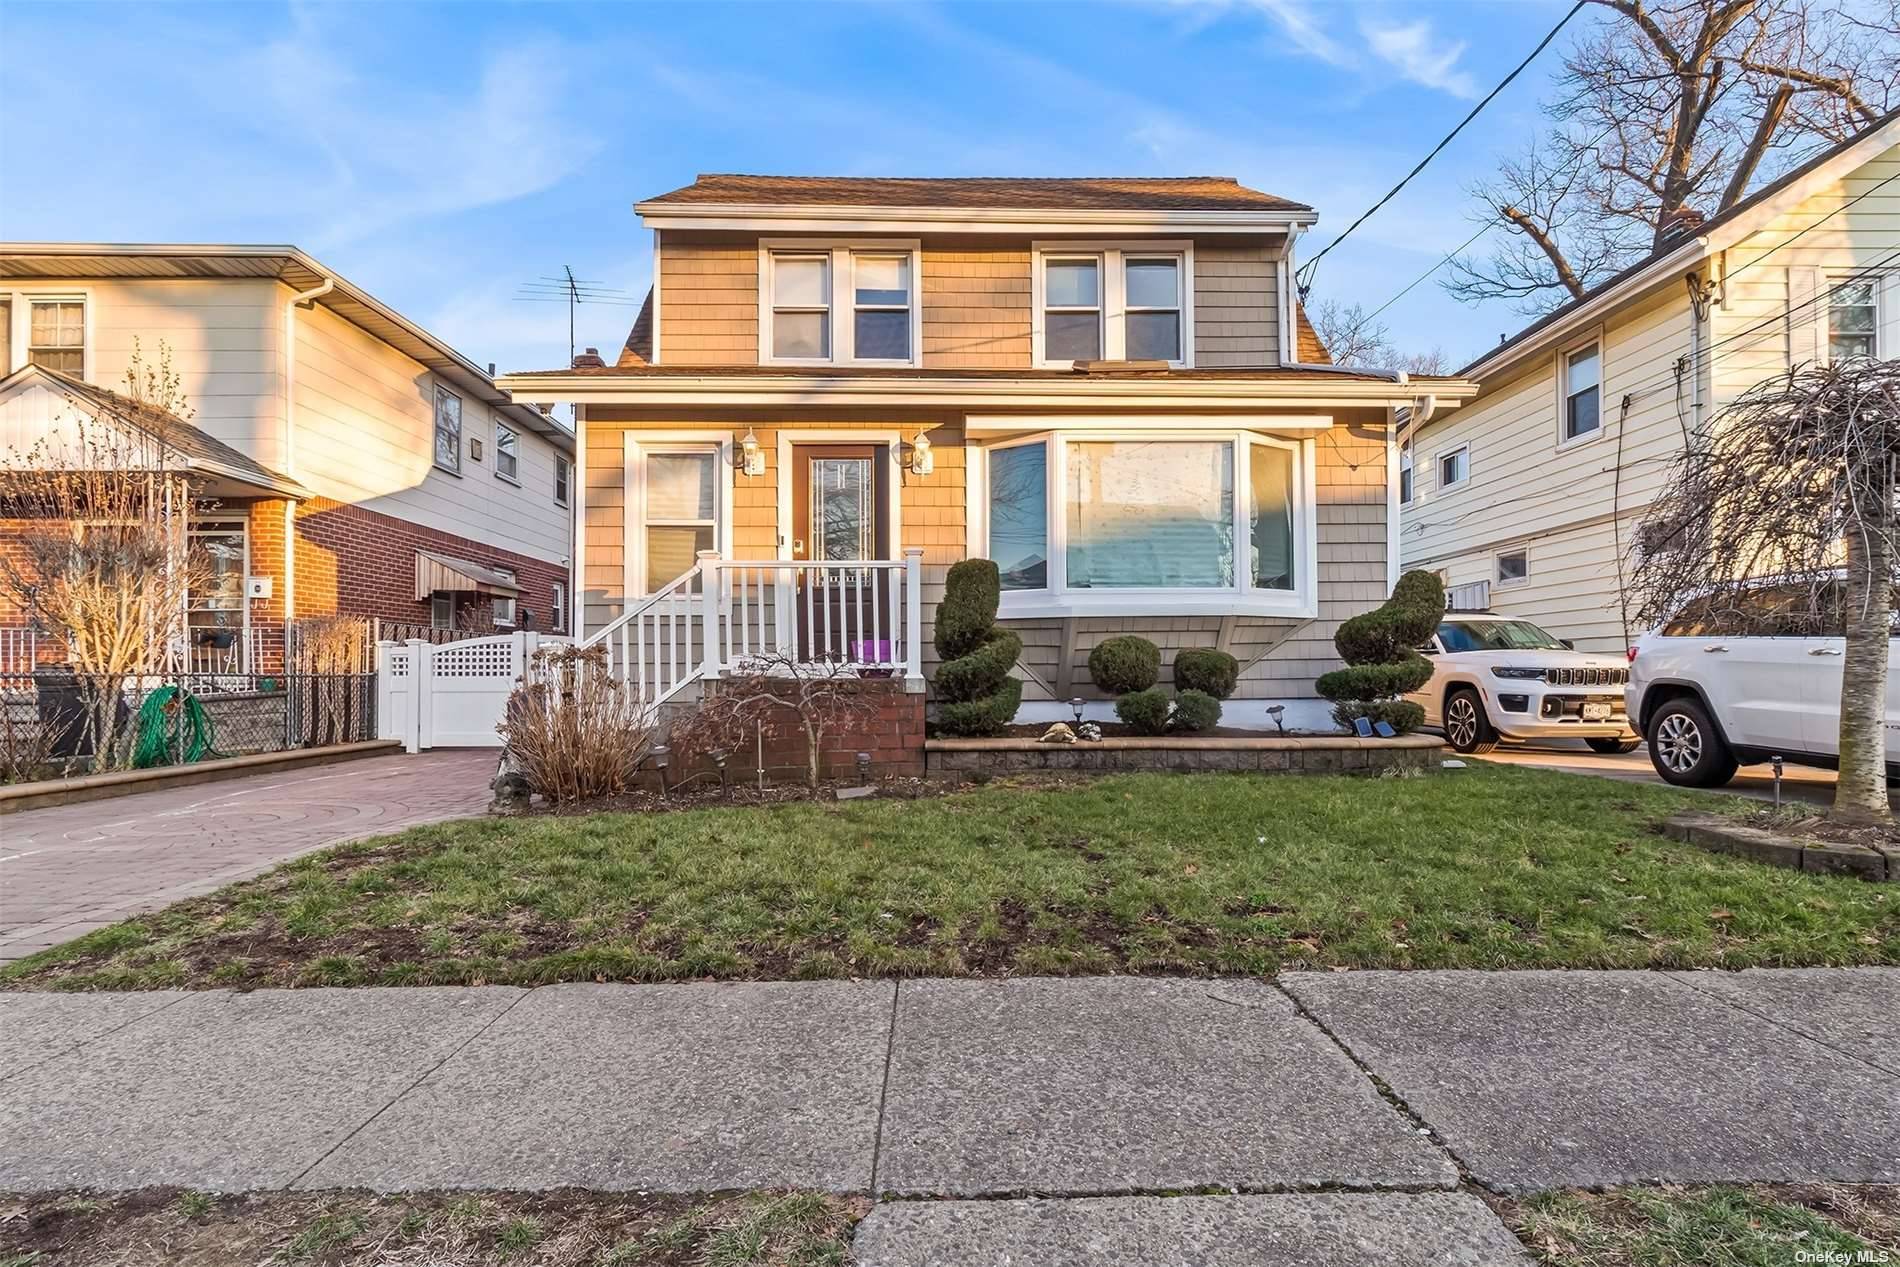 You don't want to miss this beautiful 3 Bedroom Colonial home.